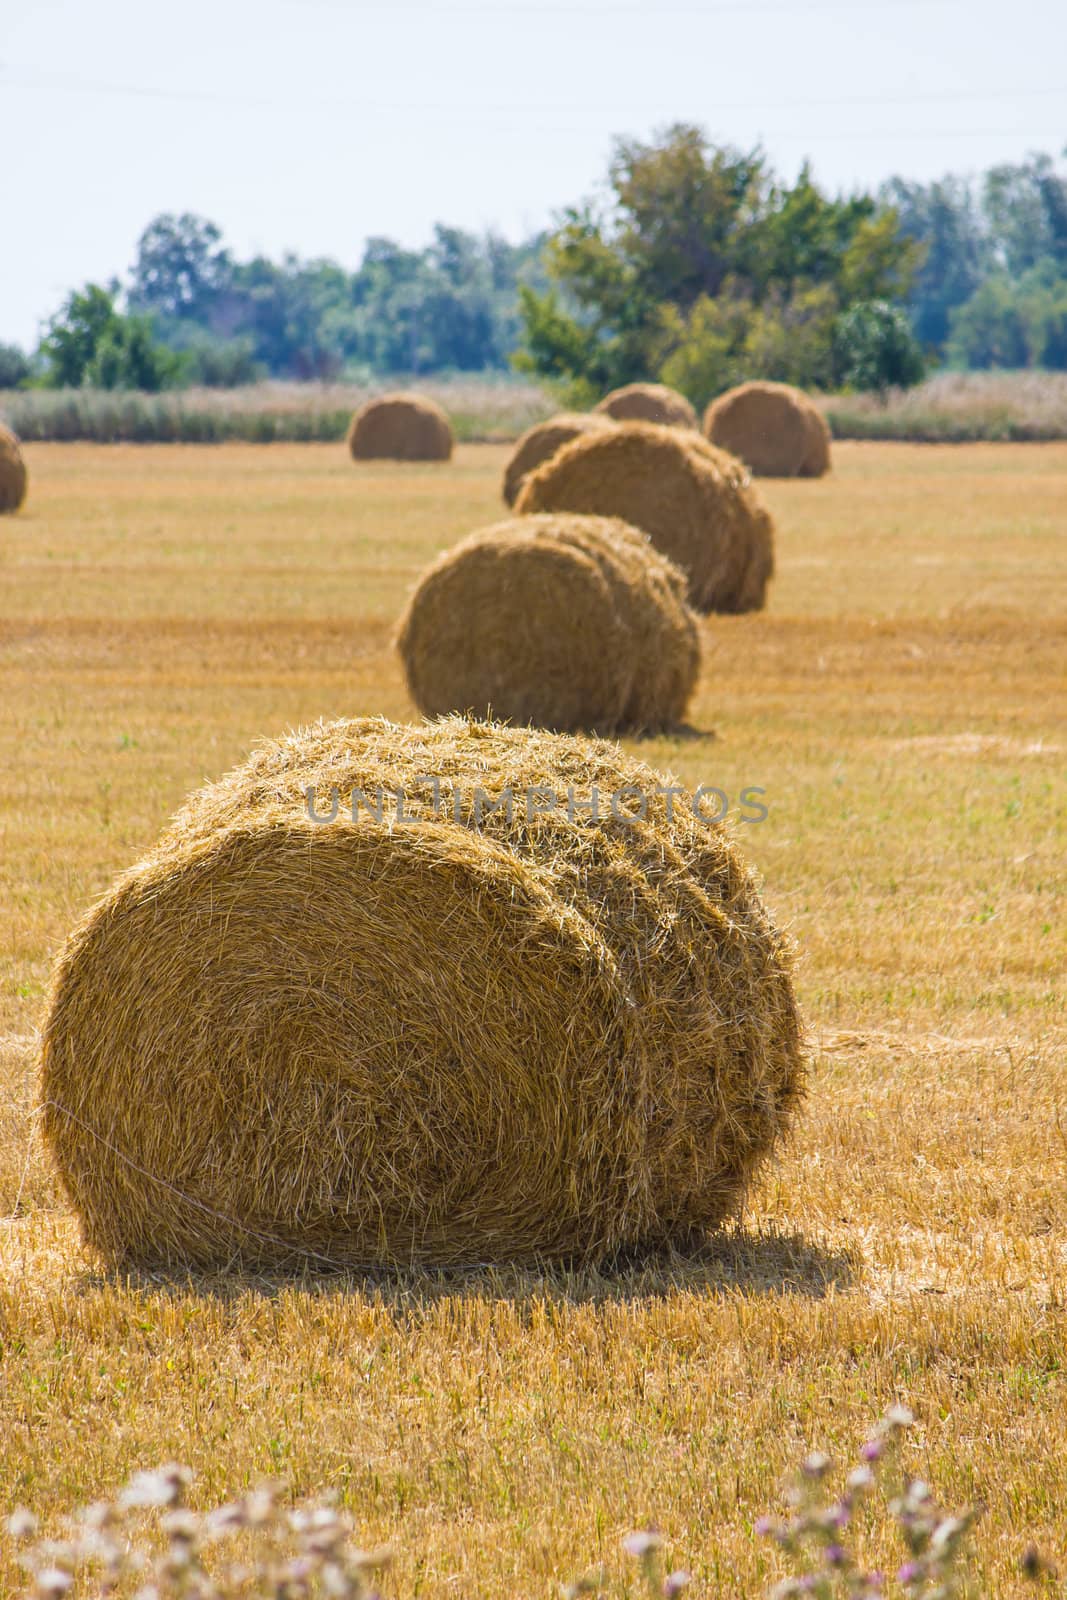 The rolls of straw in the summer on the field